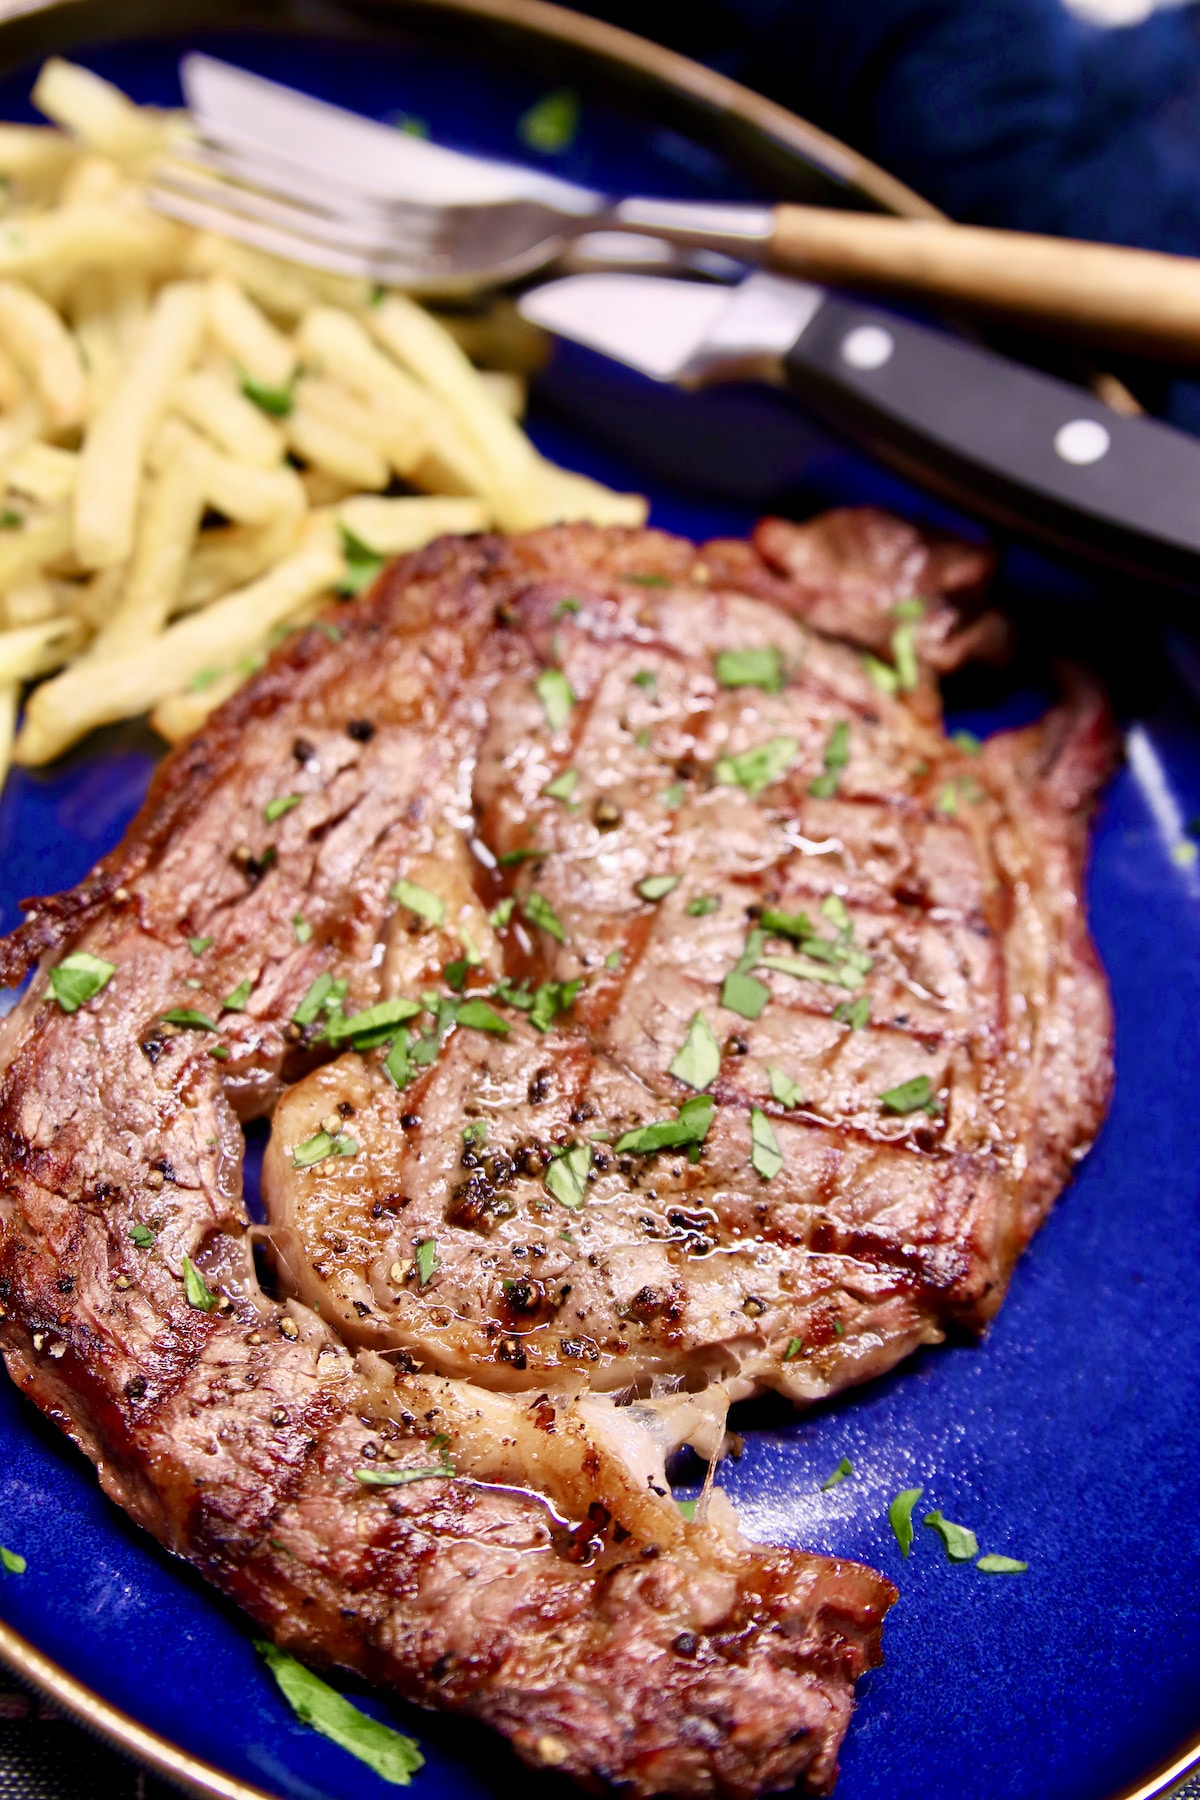 grilled steak on a plate with fries.